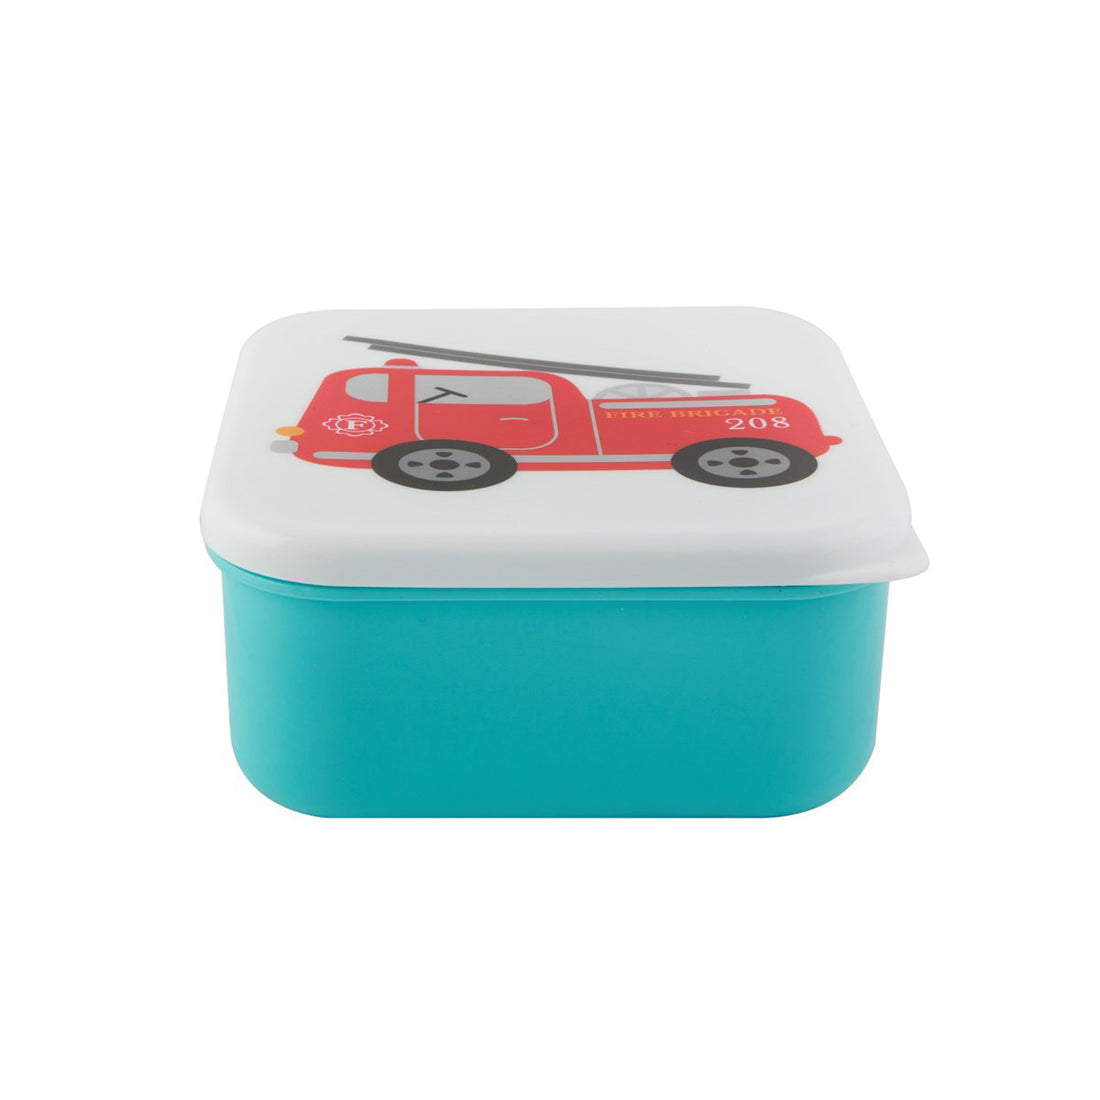 rjb-stone-fire-engine-square-lunch-box- (1)